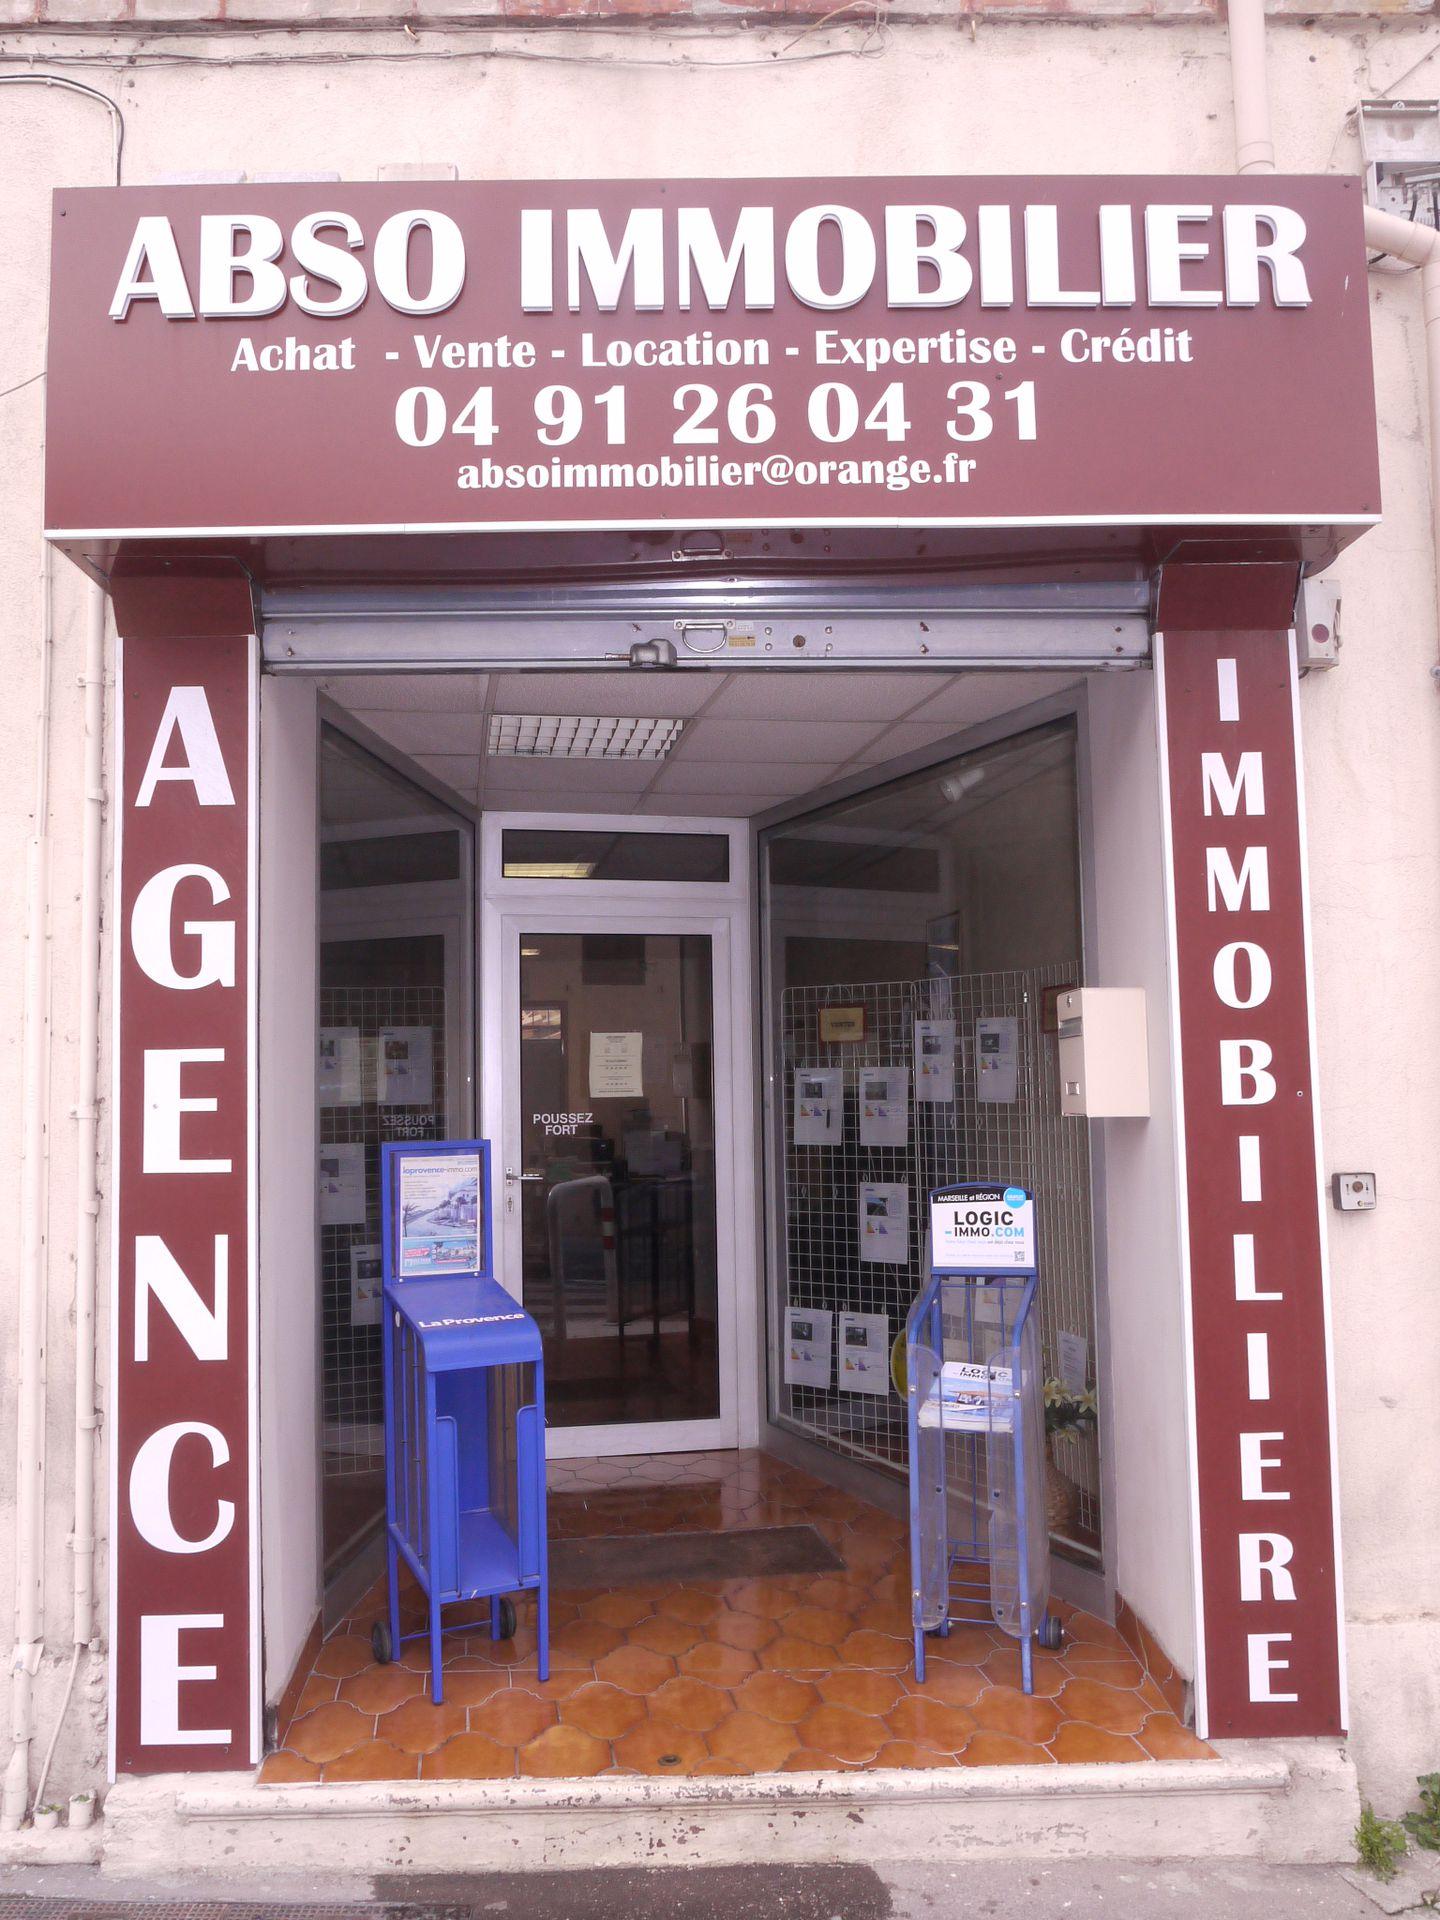 Abso Immobilier Marseille